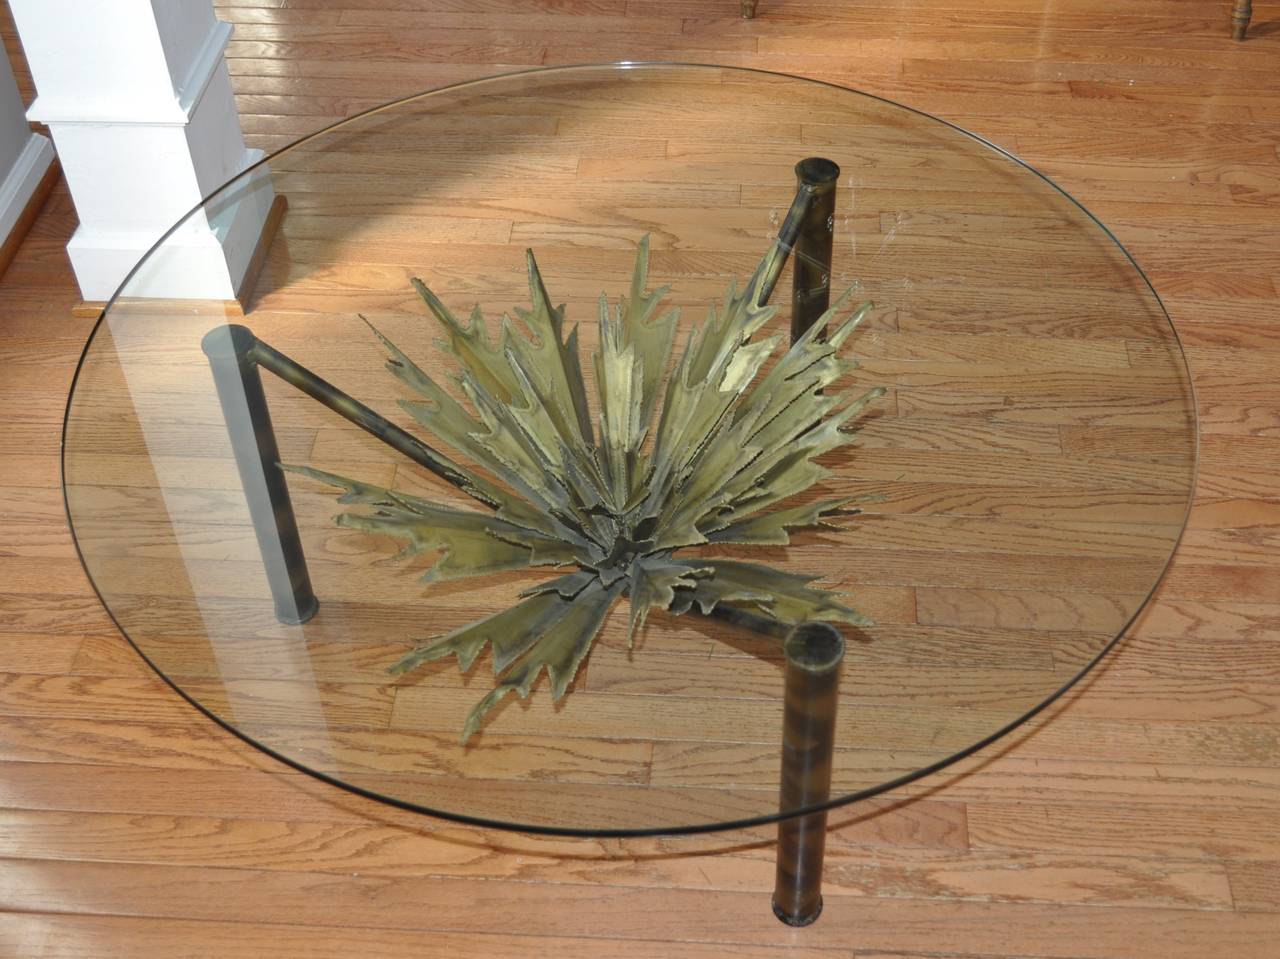 Very rare Brutalist glass and metal cocktail table in the style of Paul Evans and Silas Seandel. A stunning torch-cut mixed-metal sculptural sunburst with brass, copper and steel tones, rests upon the unique three legged metal table base. This piece